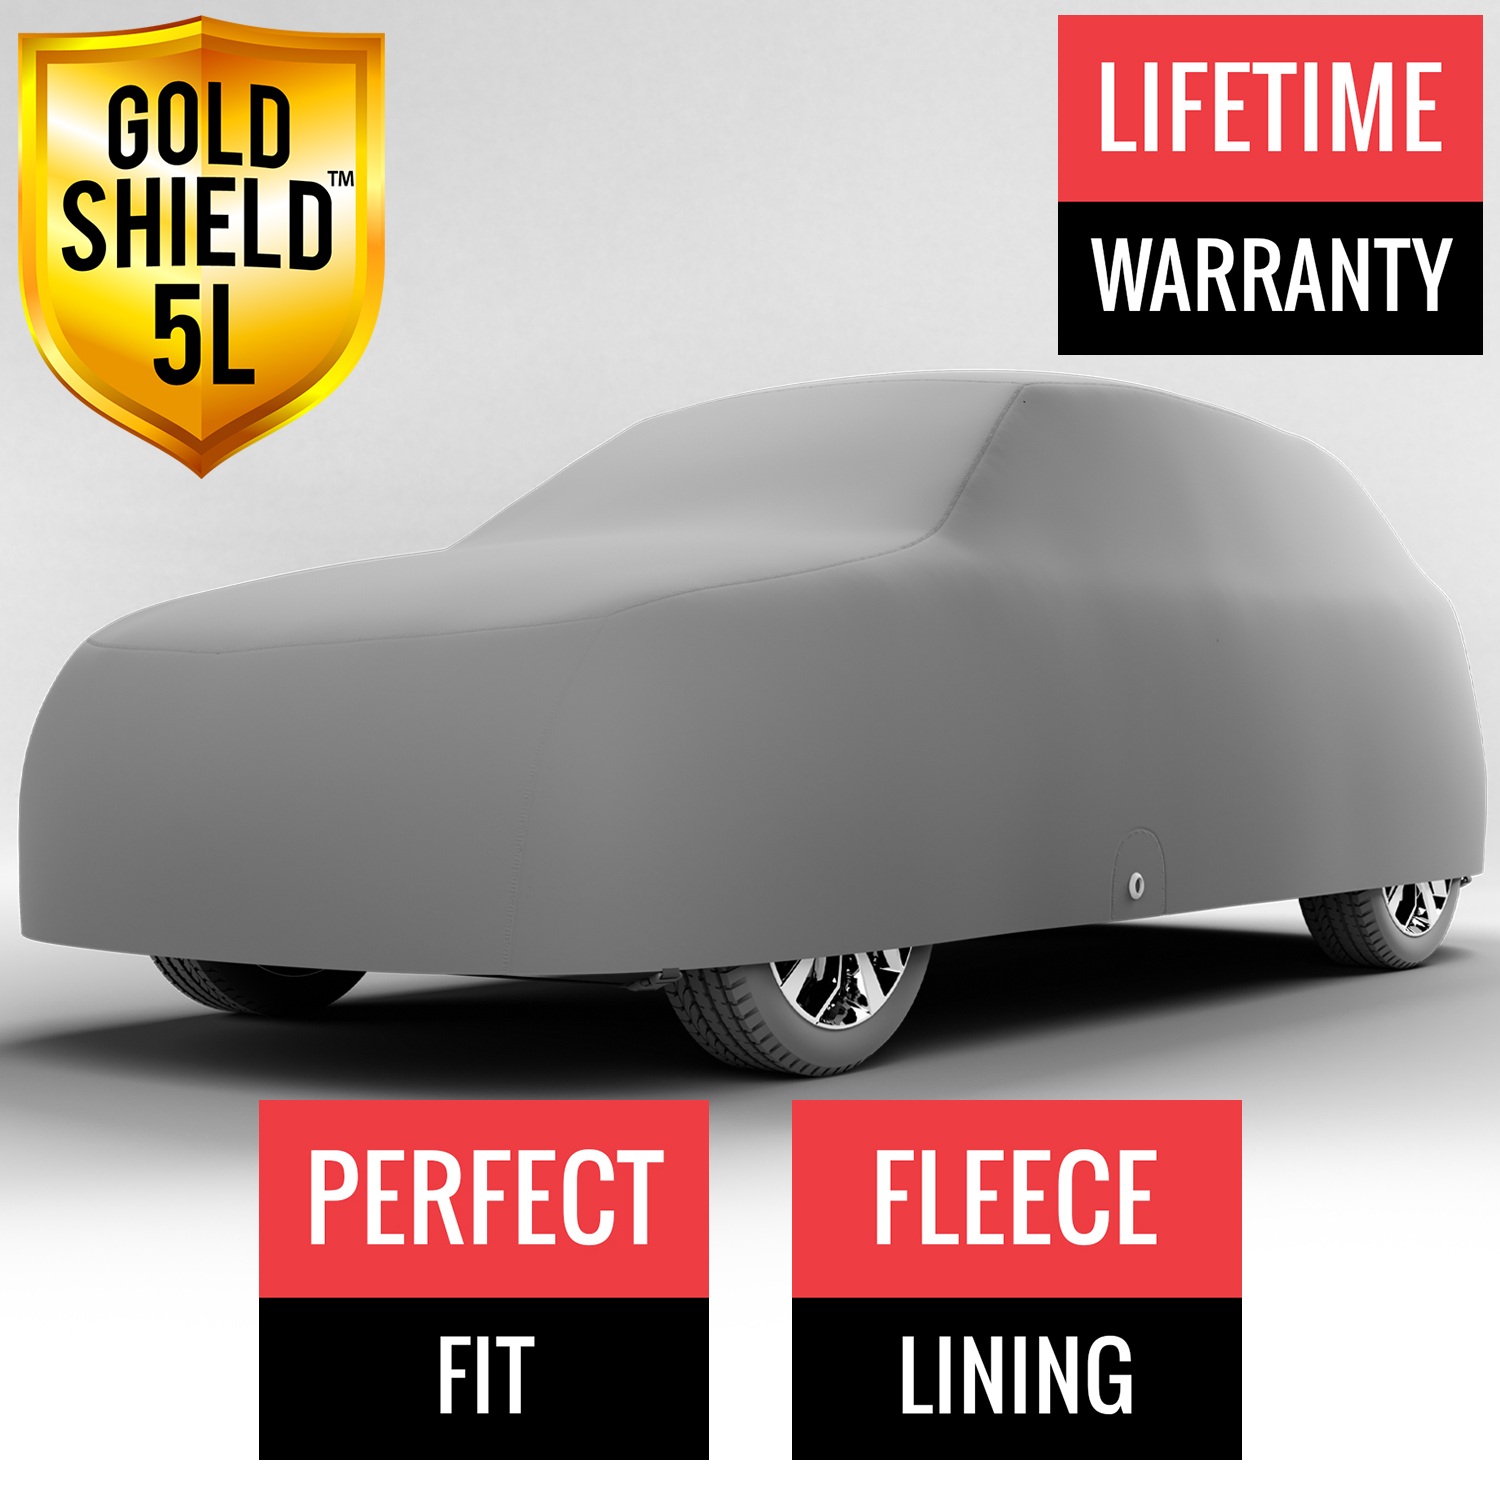 Gold Shield 5L - Car Cover for Toyota Prius V 2016 Wagon 4-Door